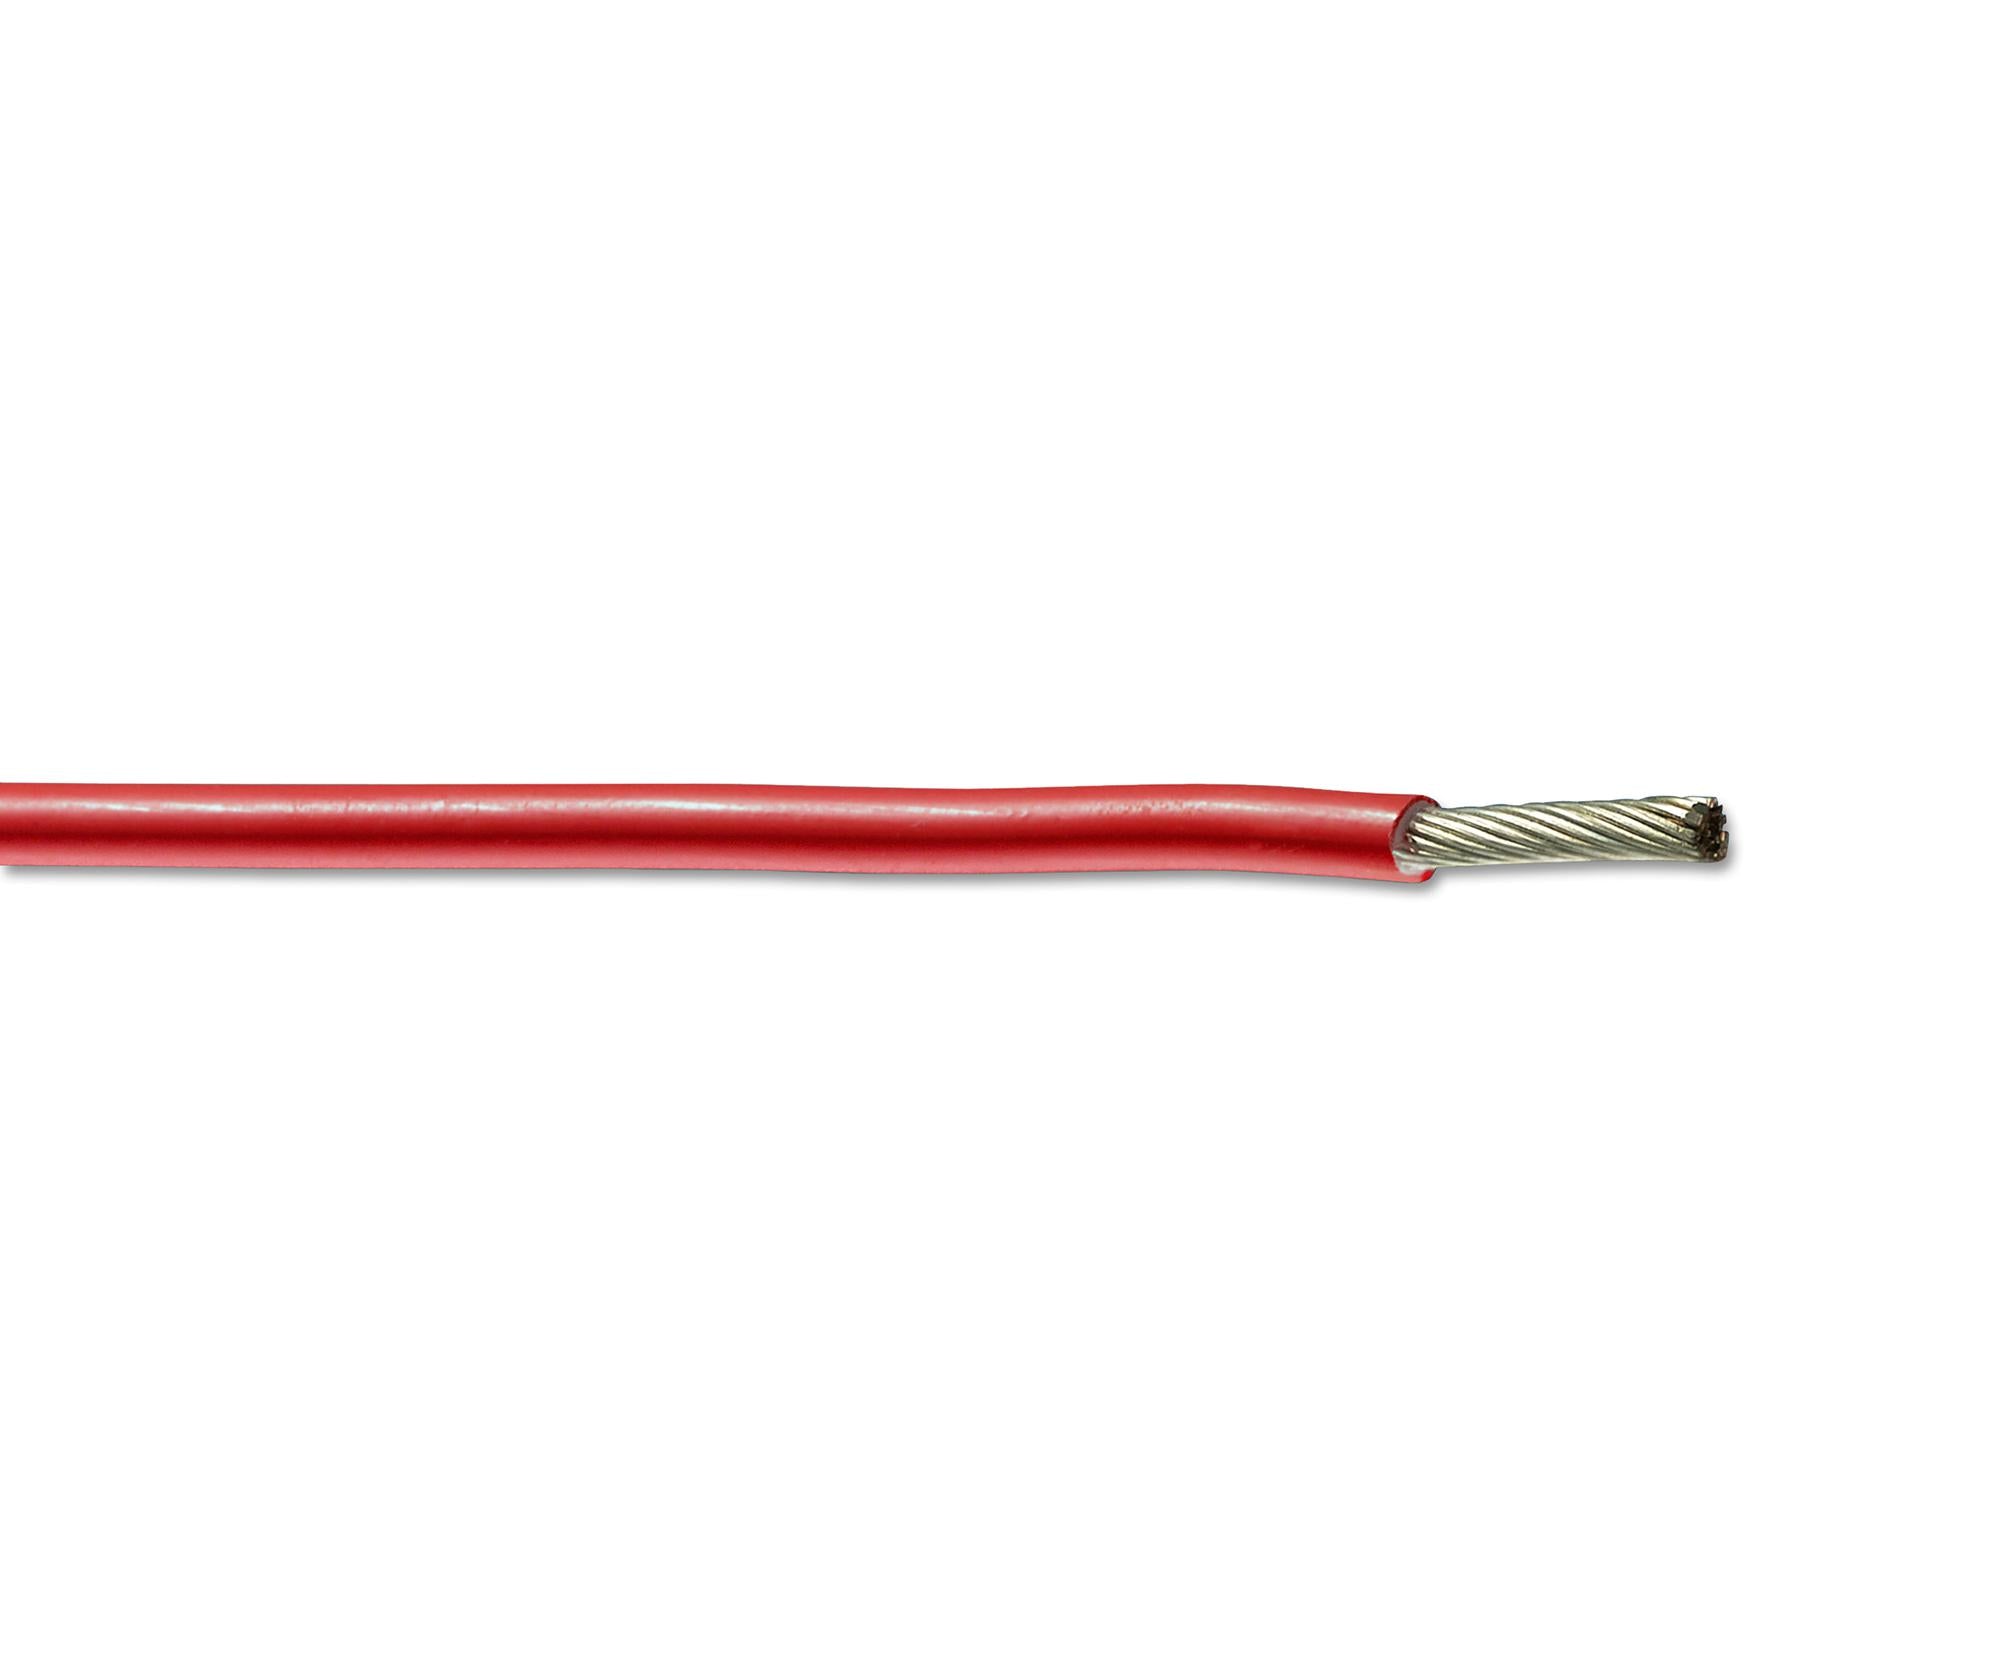 83009 002100 HOOK-UP WIRE, 18AWG, RED, 30.5M BELDEN